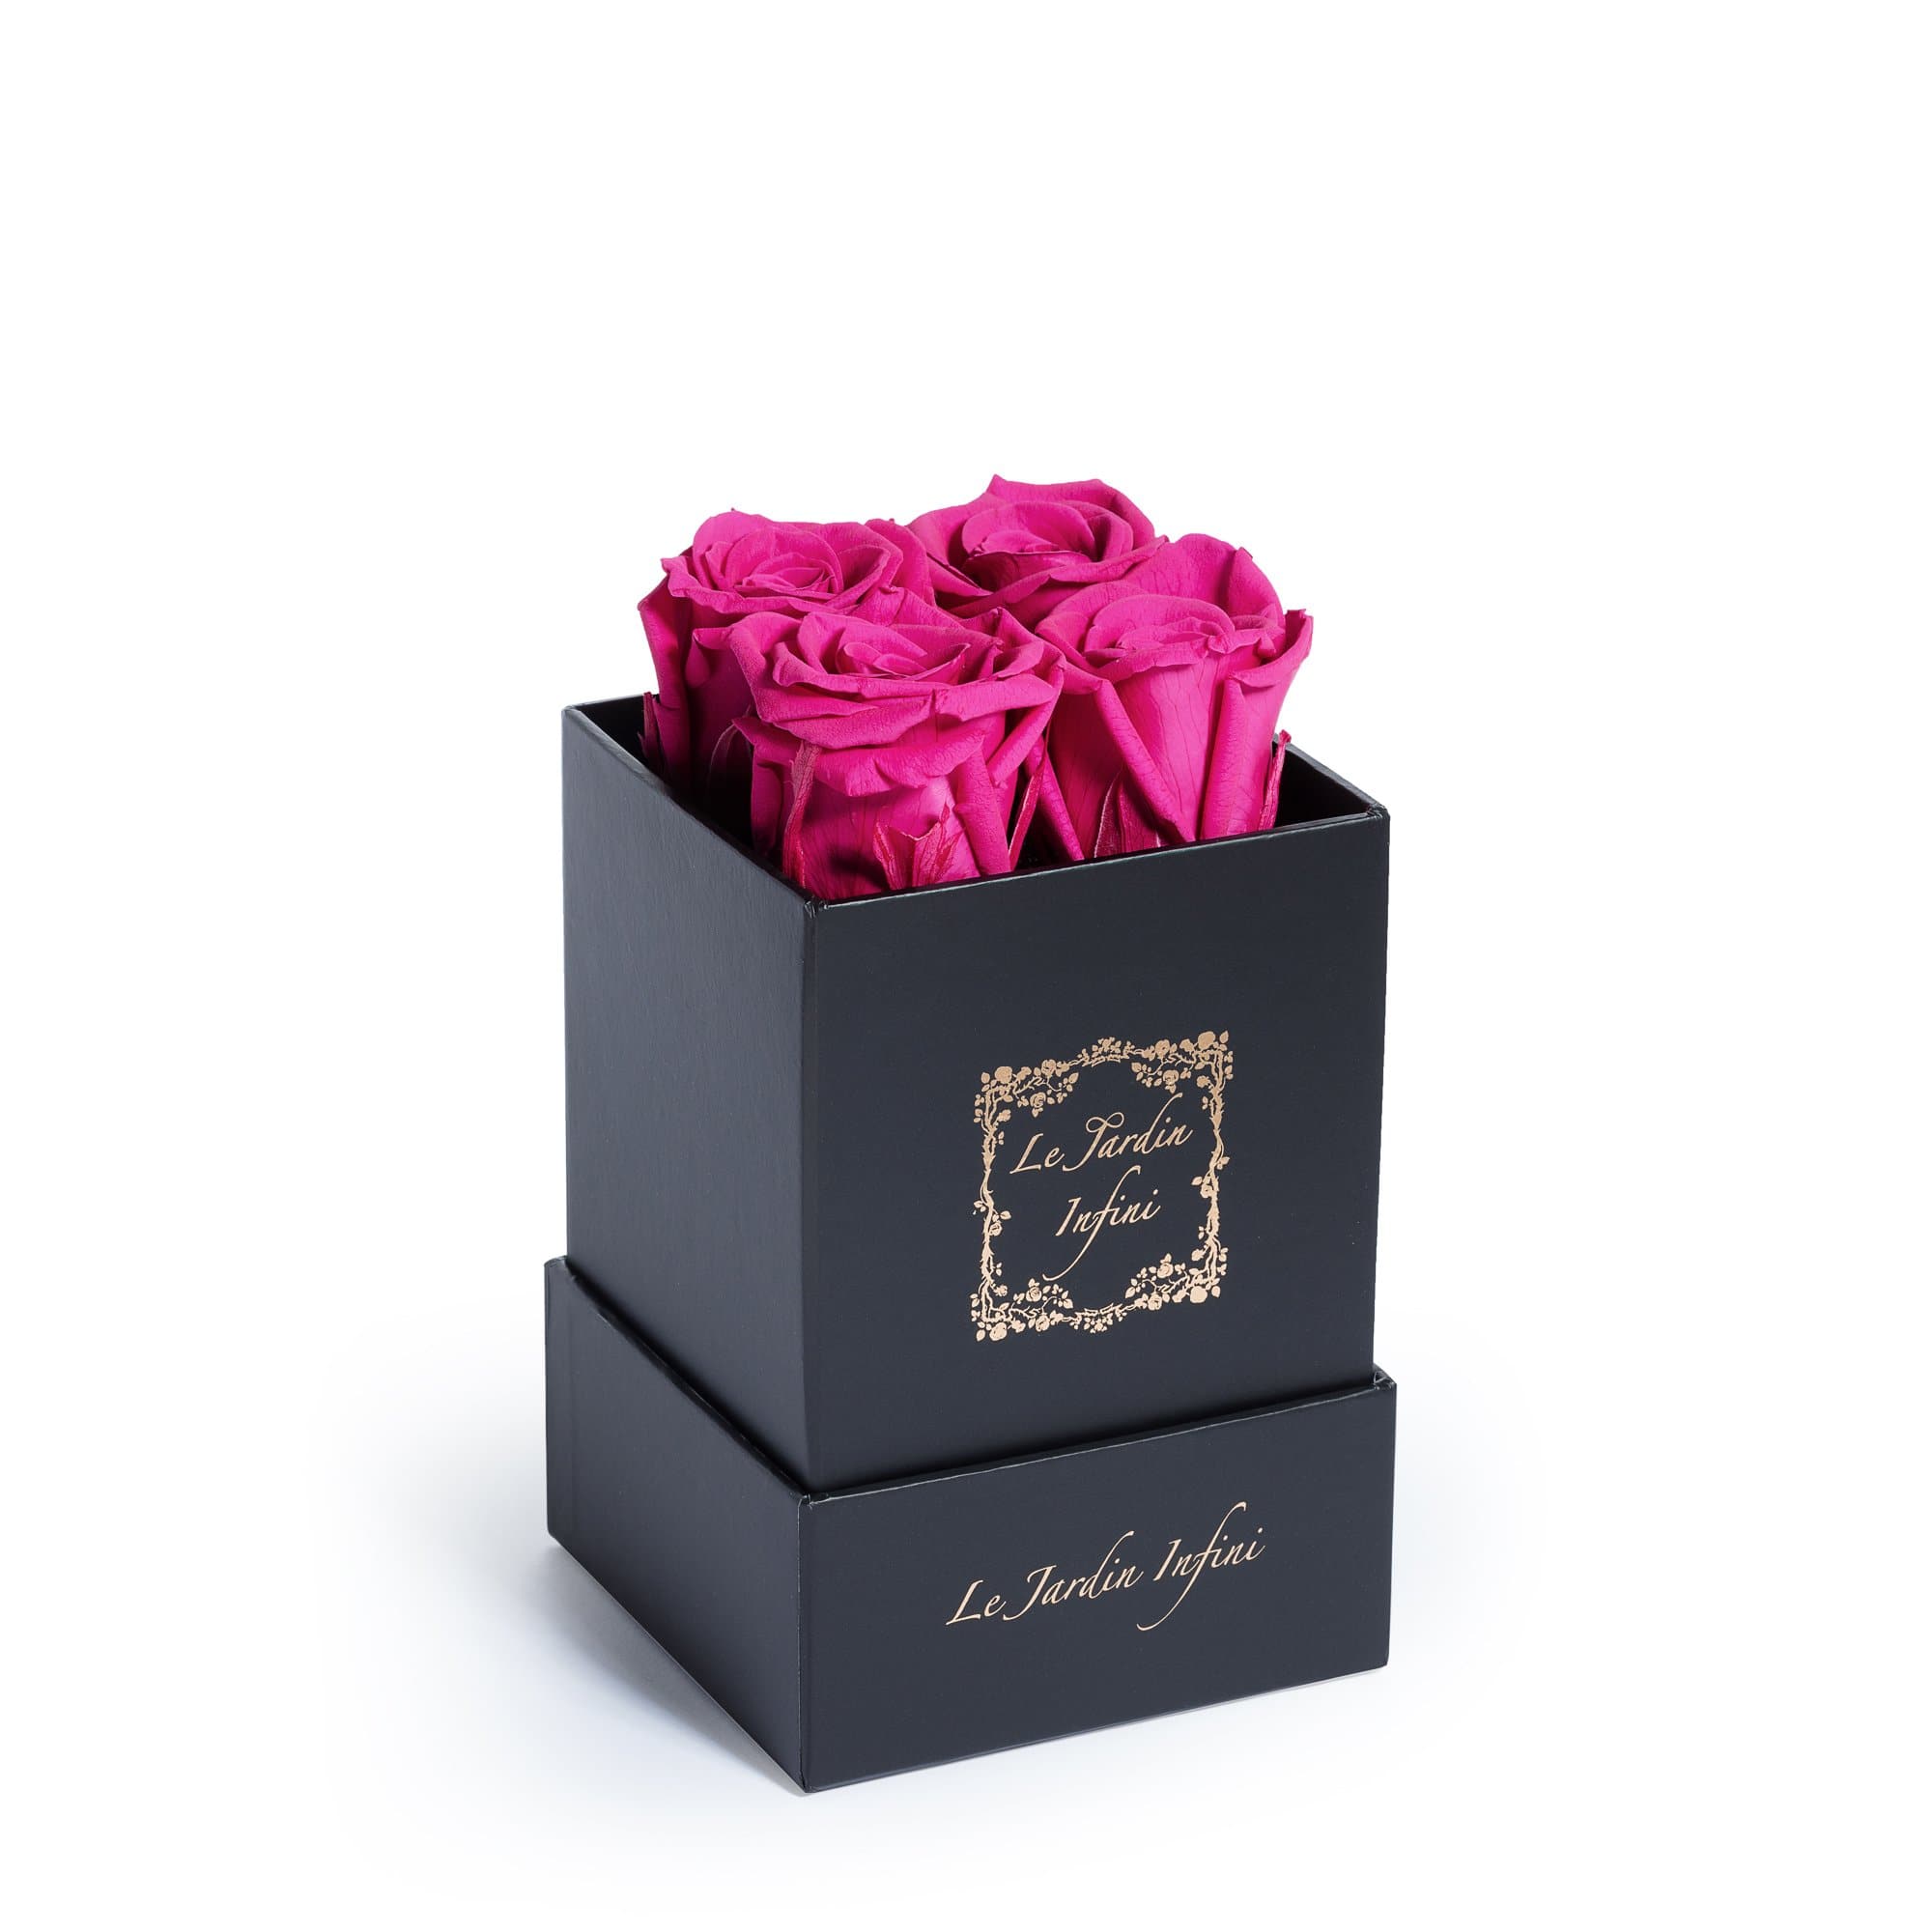 Hot Pink Preserved Roses - Small Square Black Box - Le Jardin Infini Roses in a Box